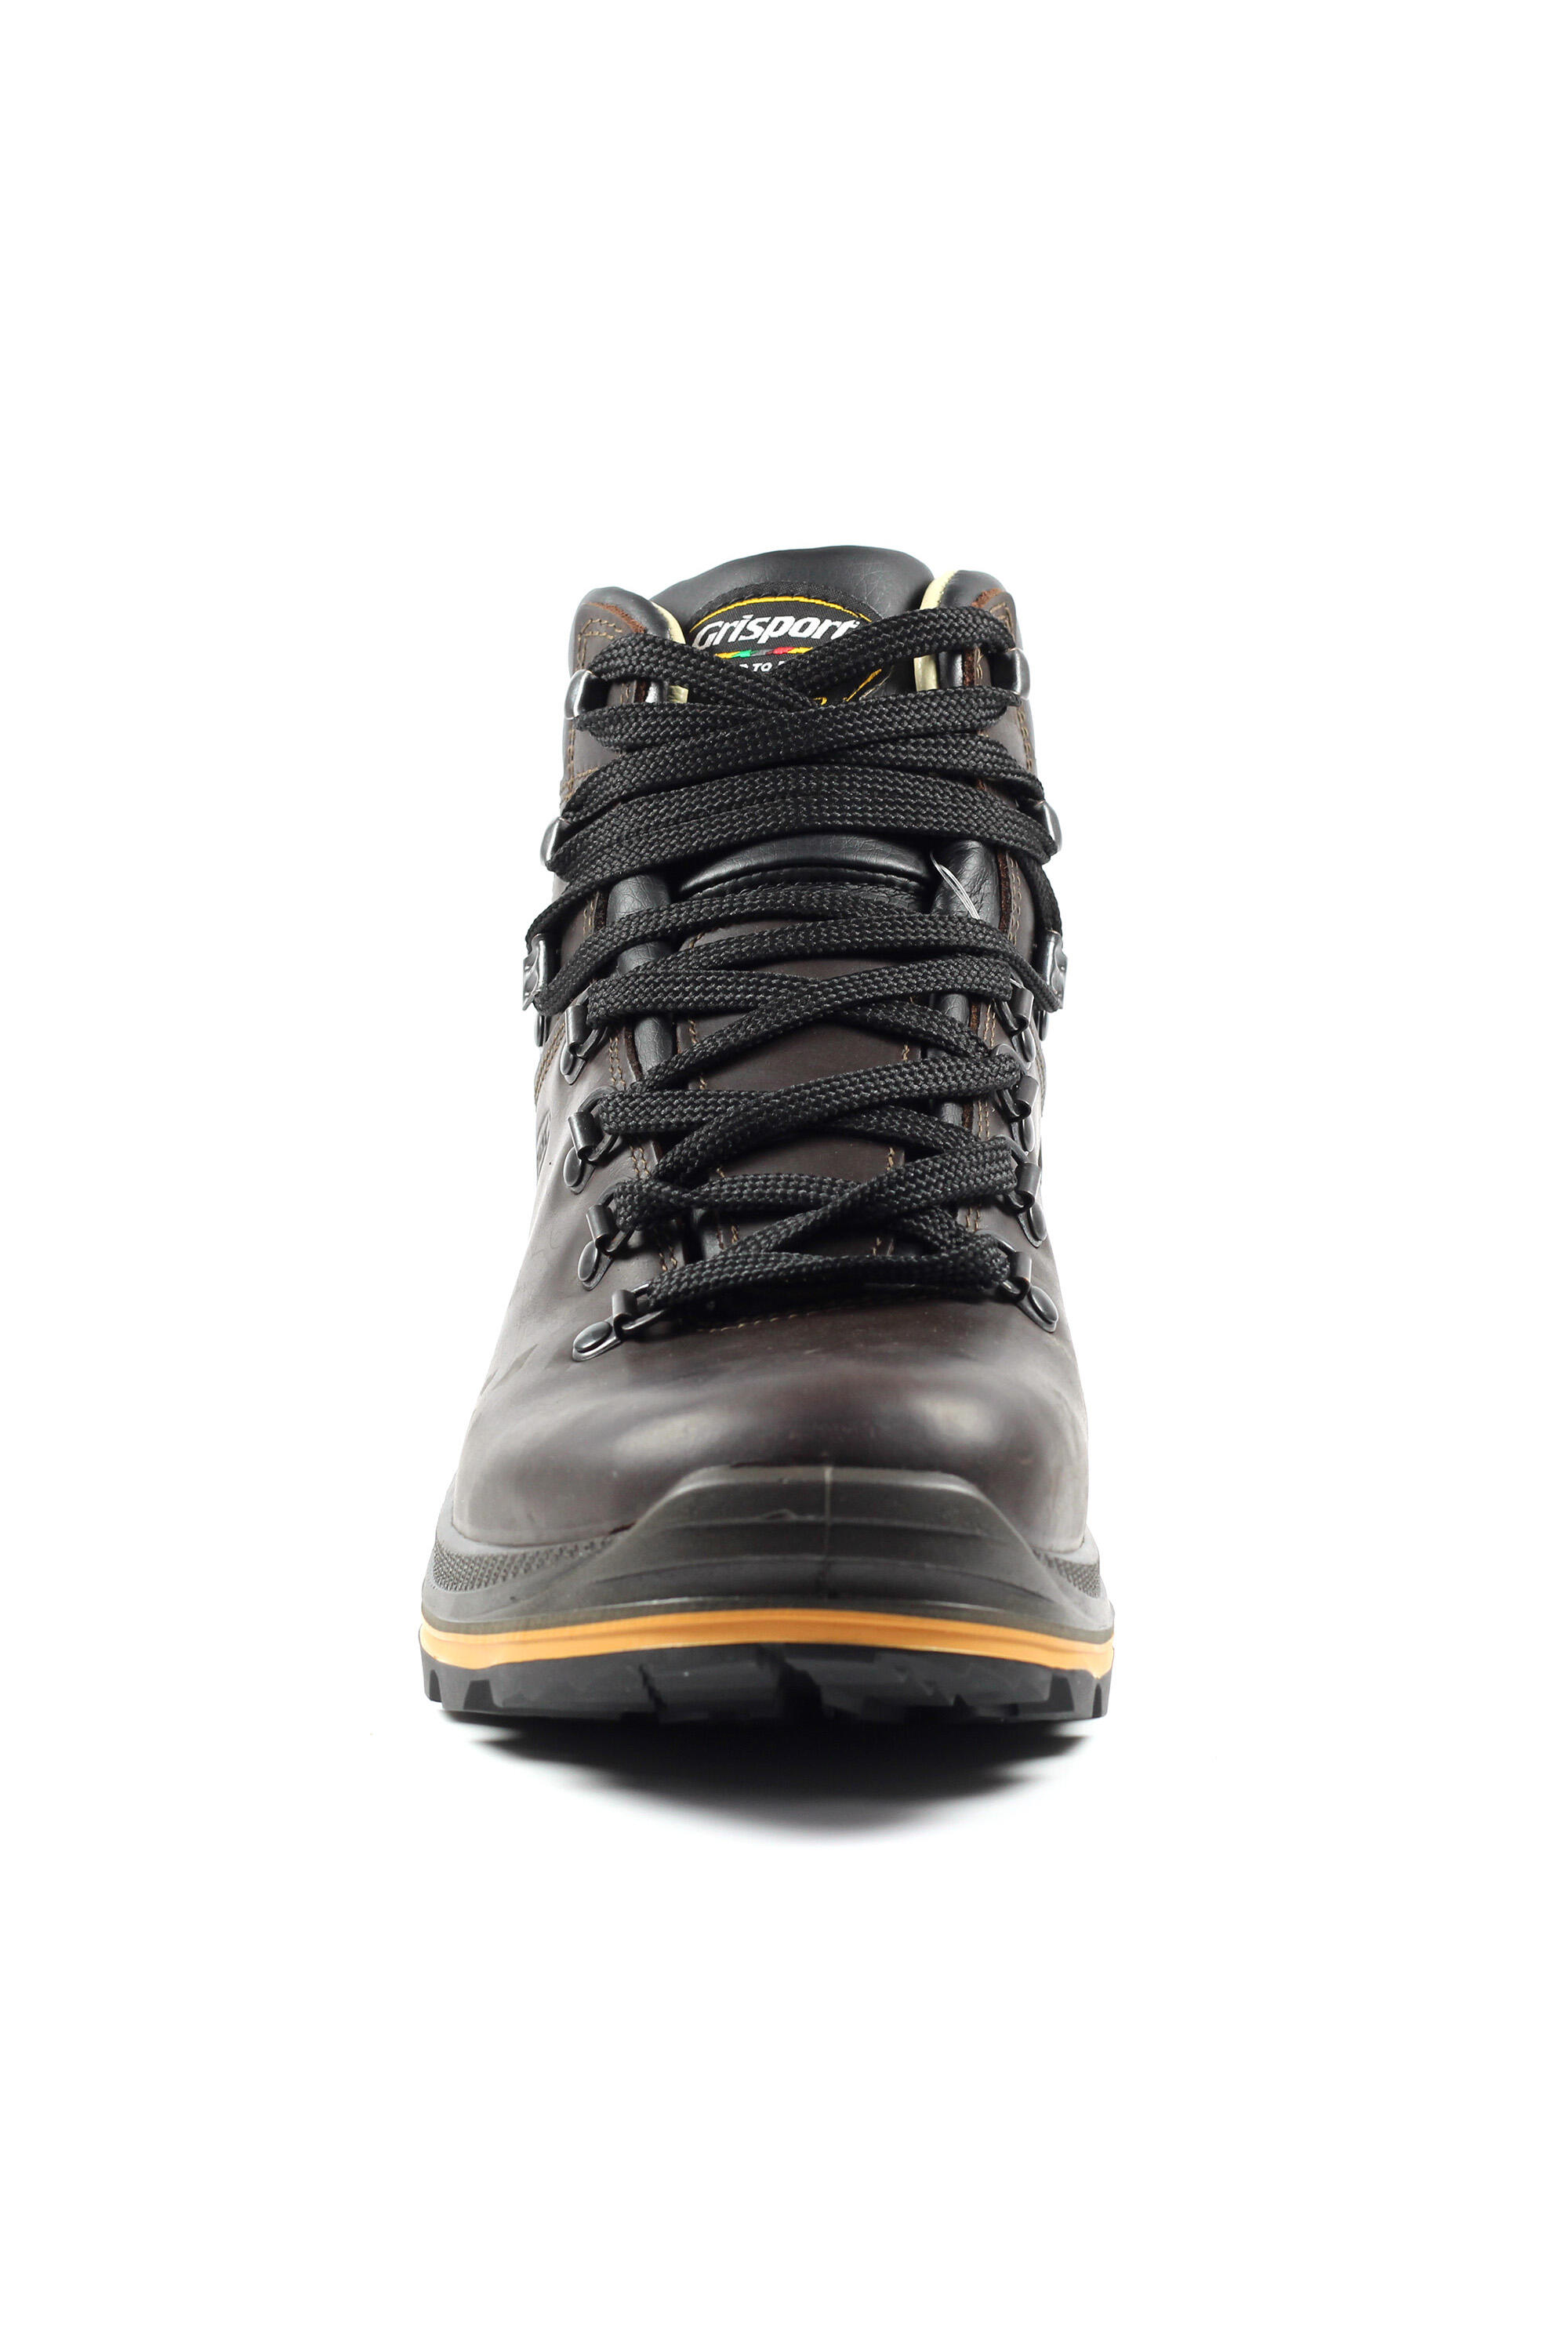 Aztec Brown Leather Wide Fit Hiking Boot 4/5